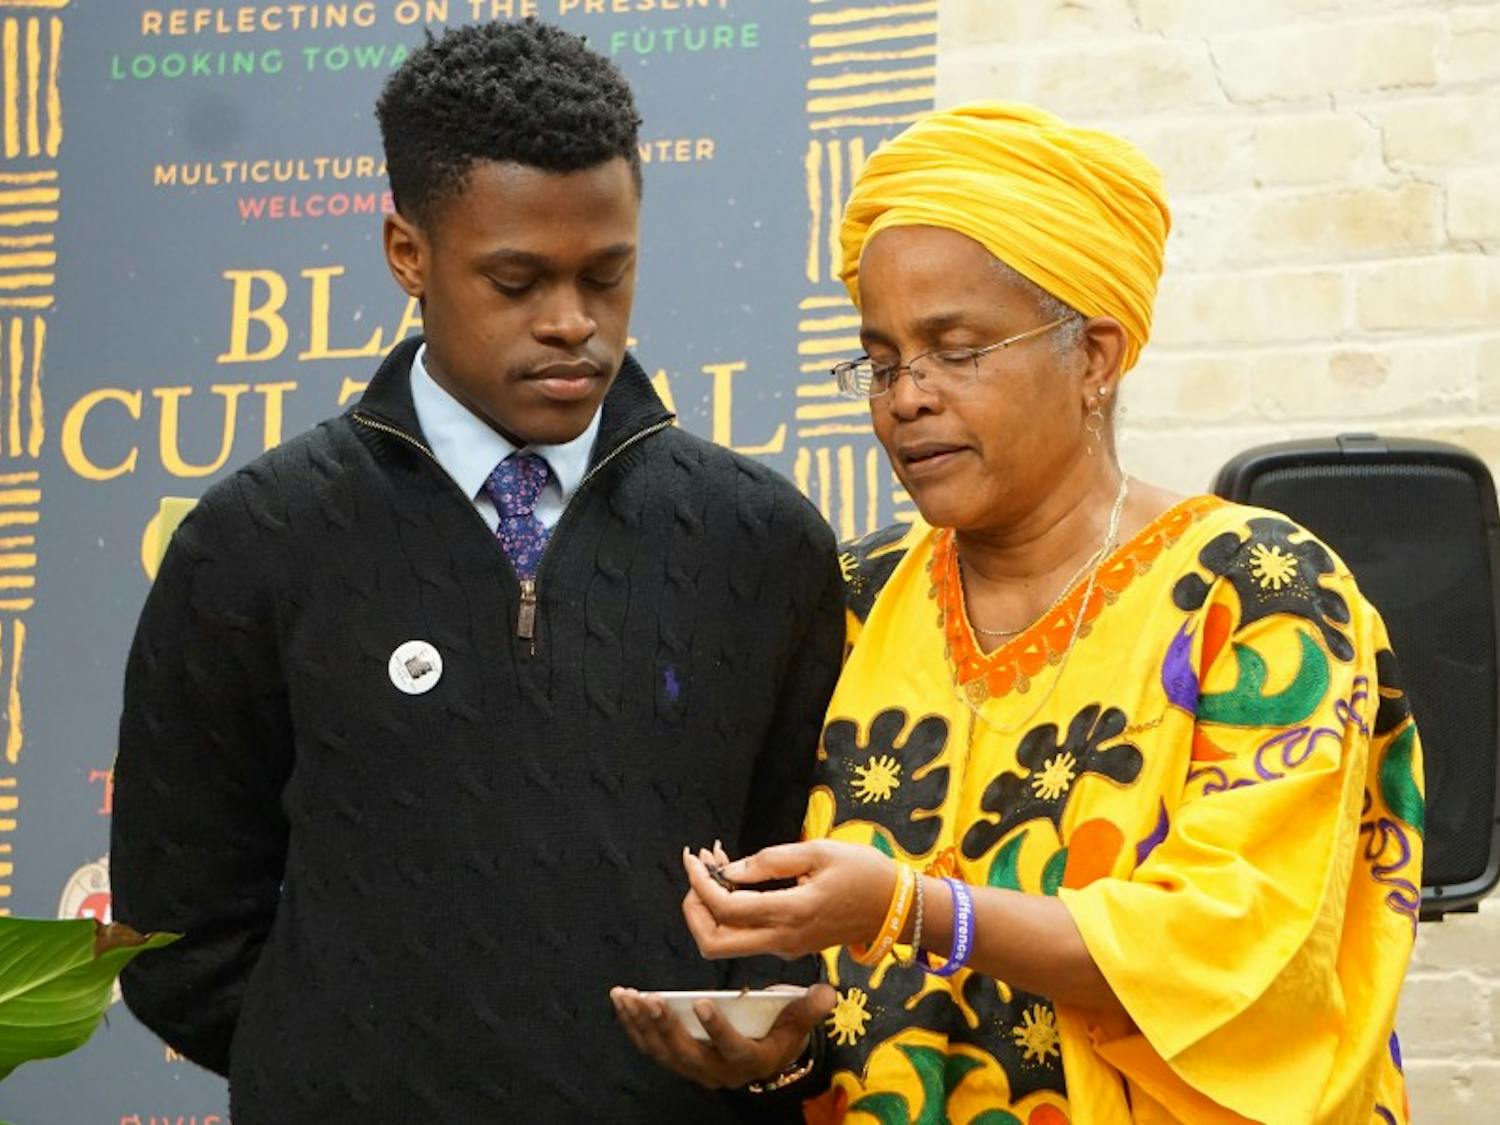 UW-Madison’s Black Student Union President Marquise Mays and Program Development and Assessment Specialist in the Division of Student Life Hazel Symonette spread tobacco around the new Black Cultural Center space during a dedication and libation ceremony.